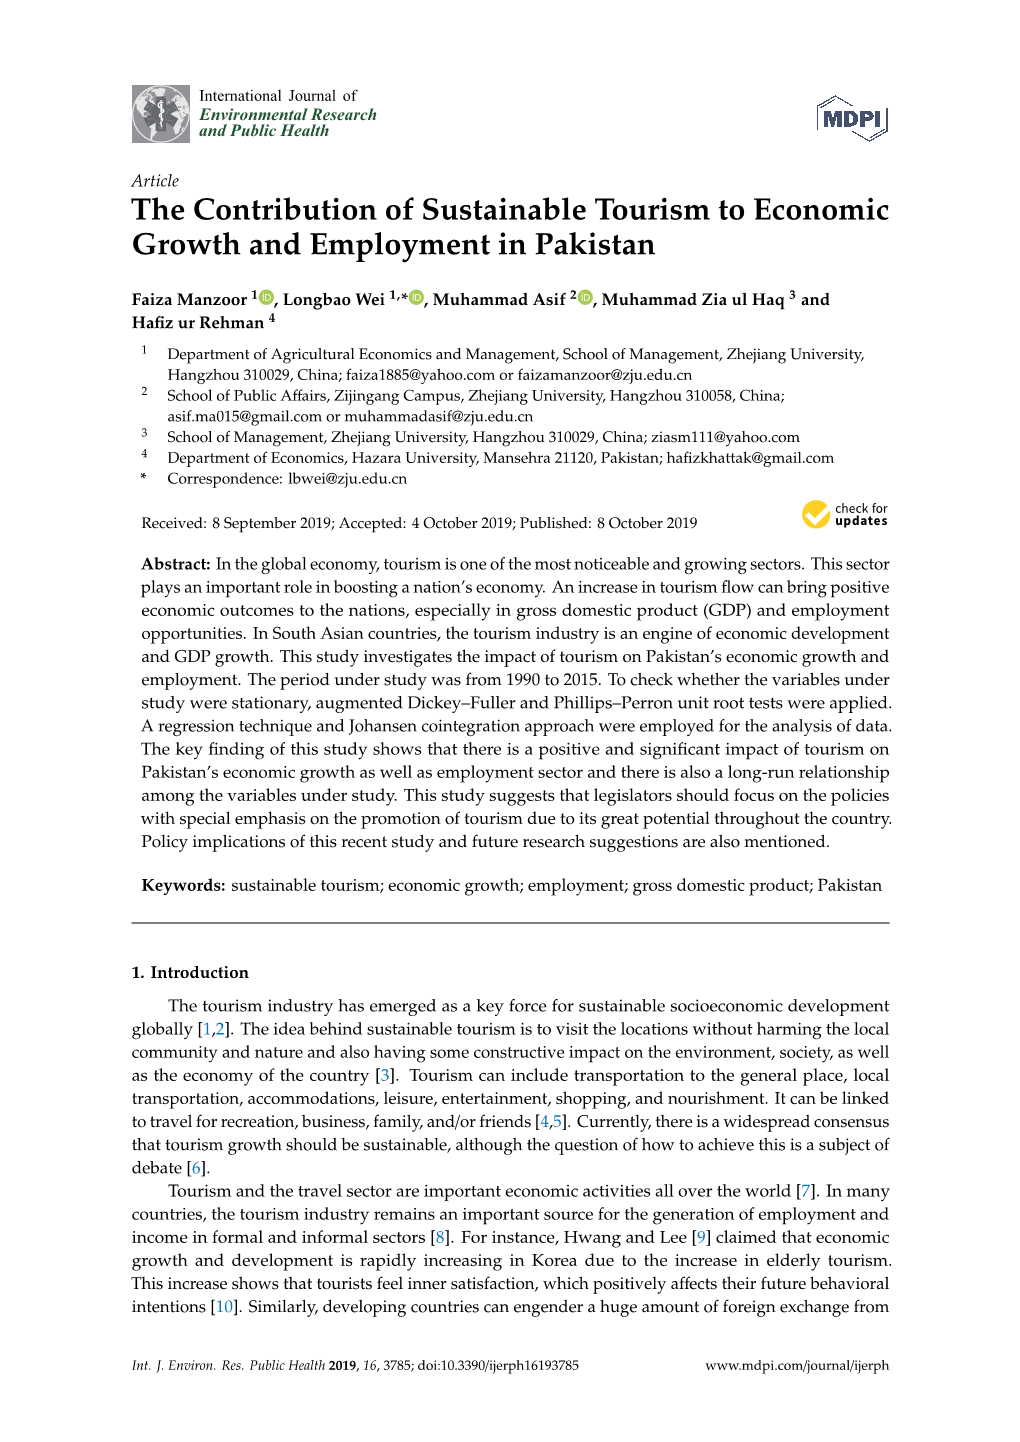 The Contribution of Sustainable Tourism to Economic Growth and Employment in Pakistan